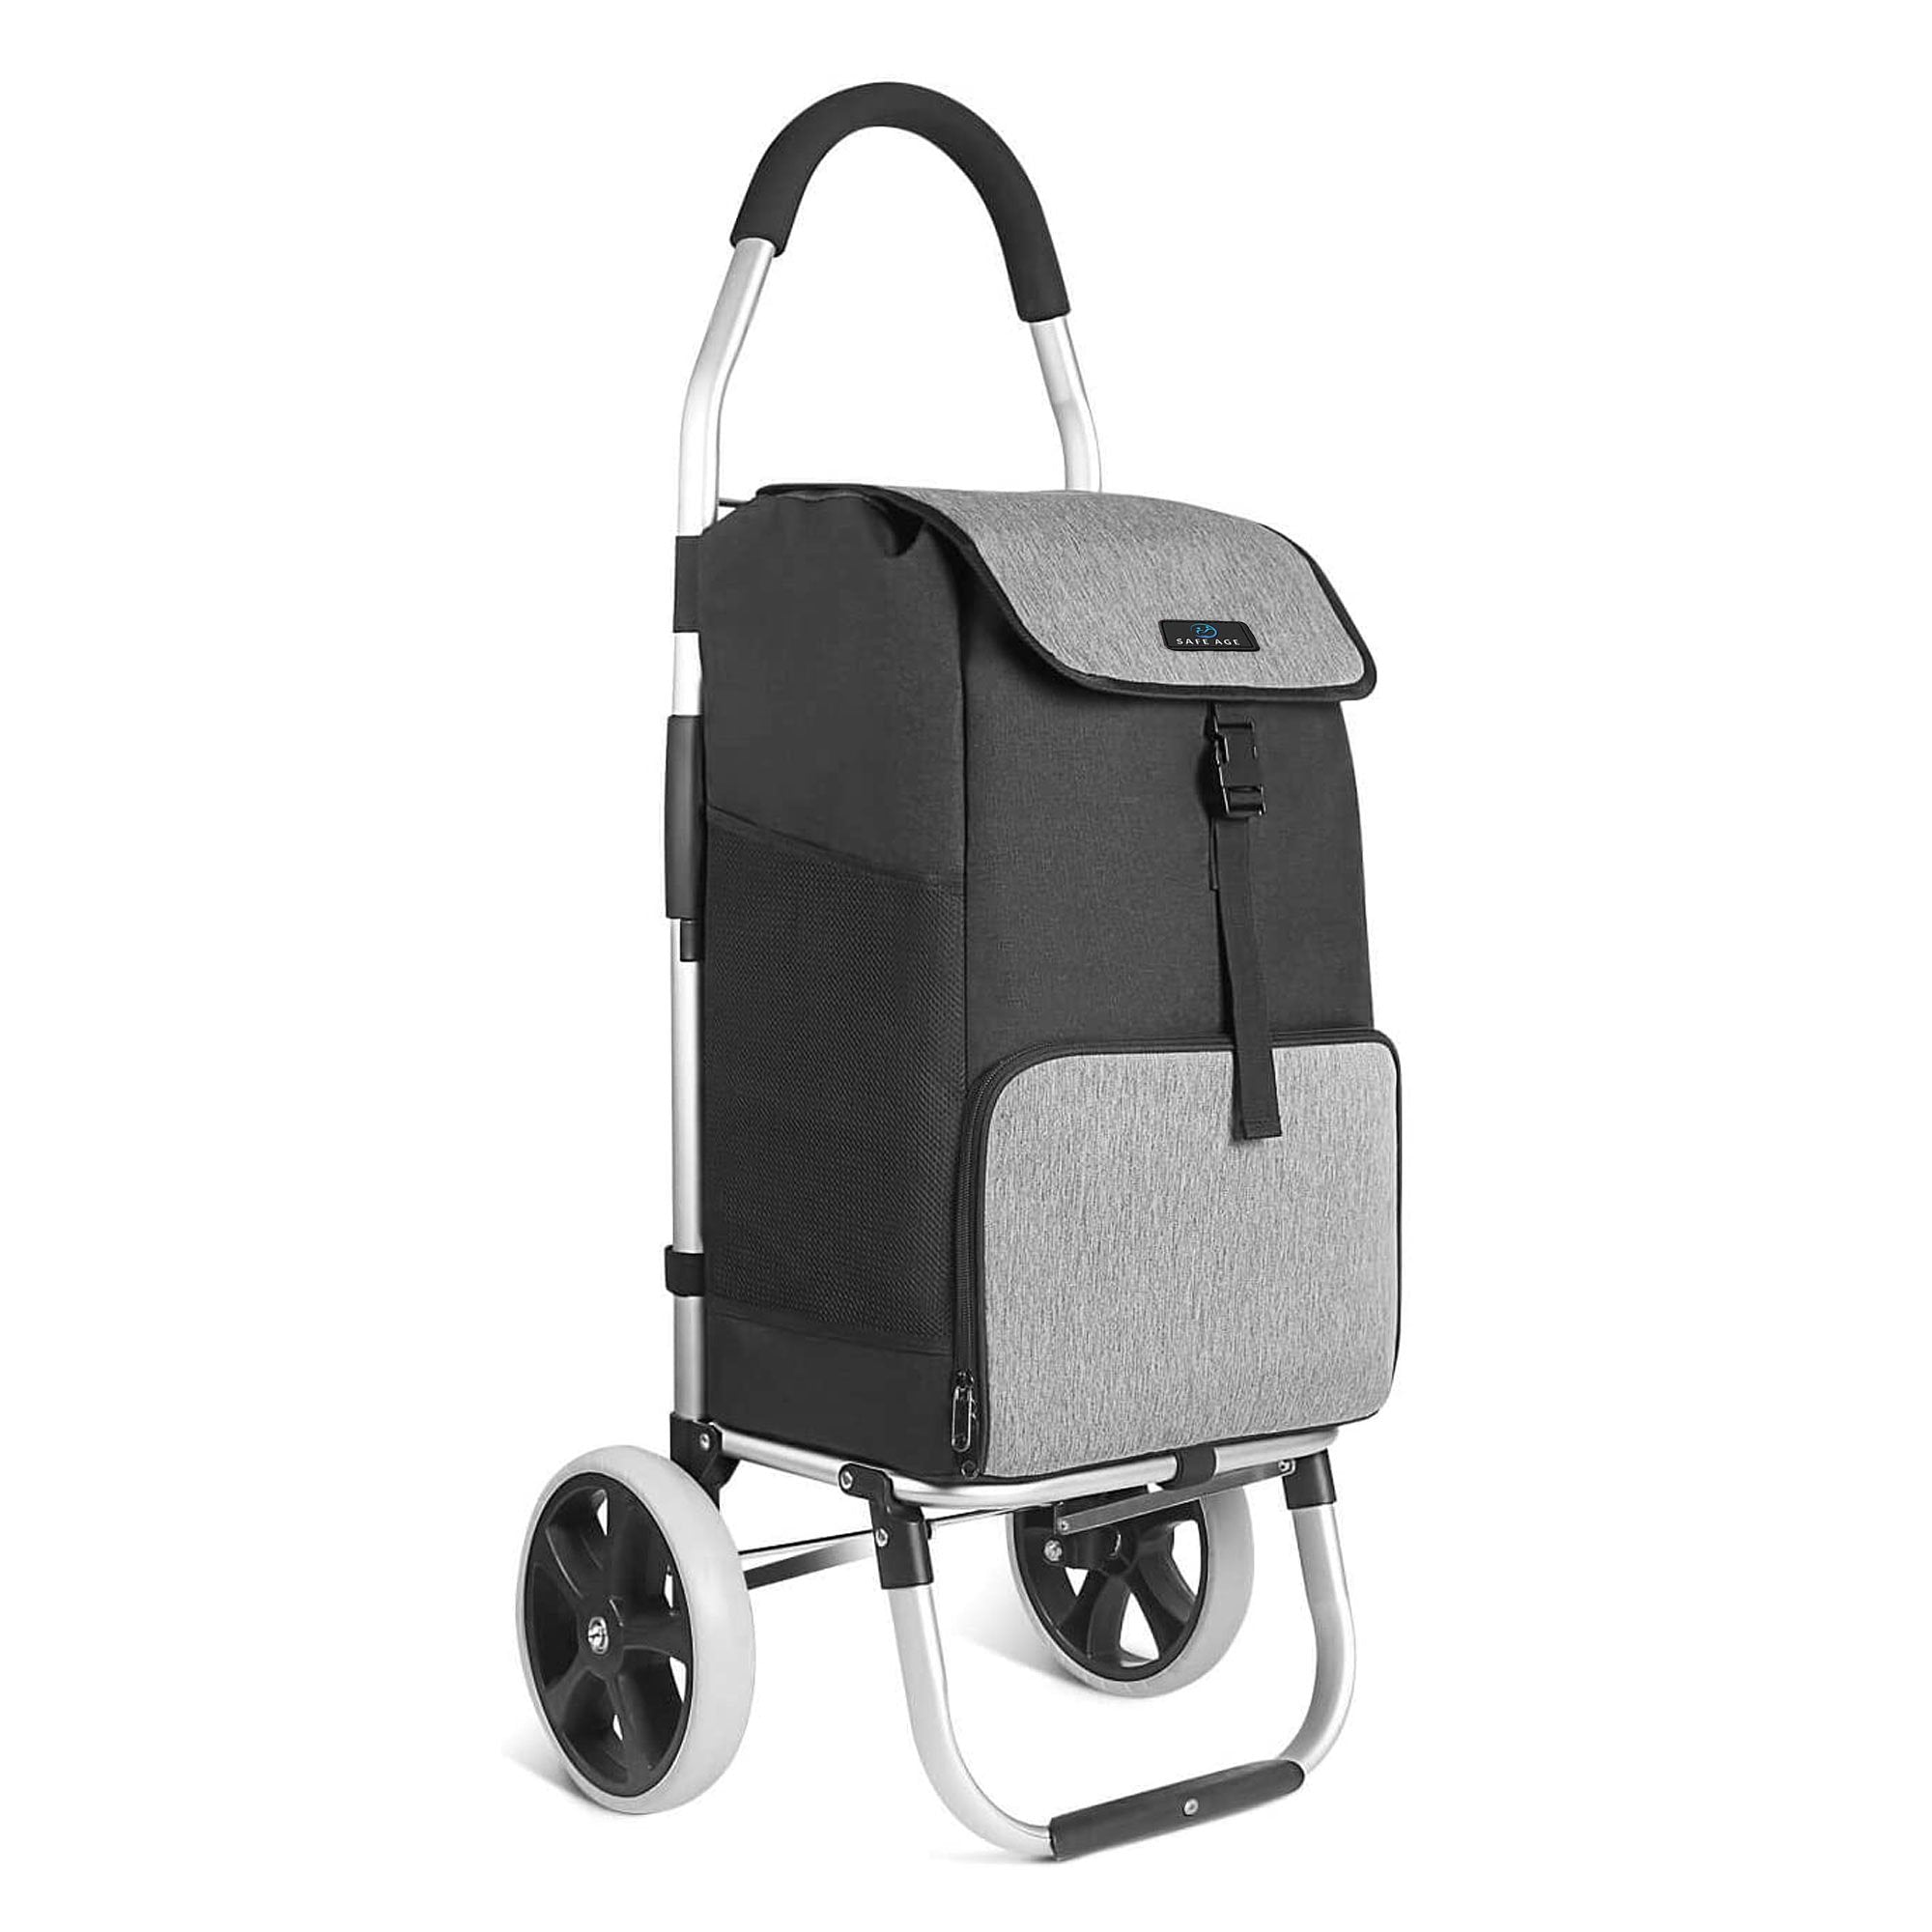 Safe Age® Shopping Trolley with Cooling Compartment - 45L - Shopping Cart - Hand Truck Function.